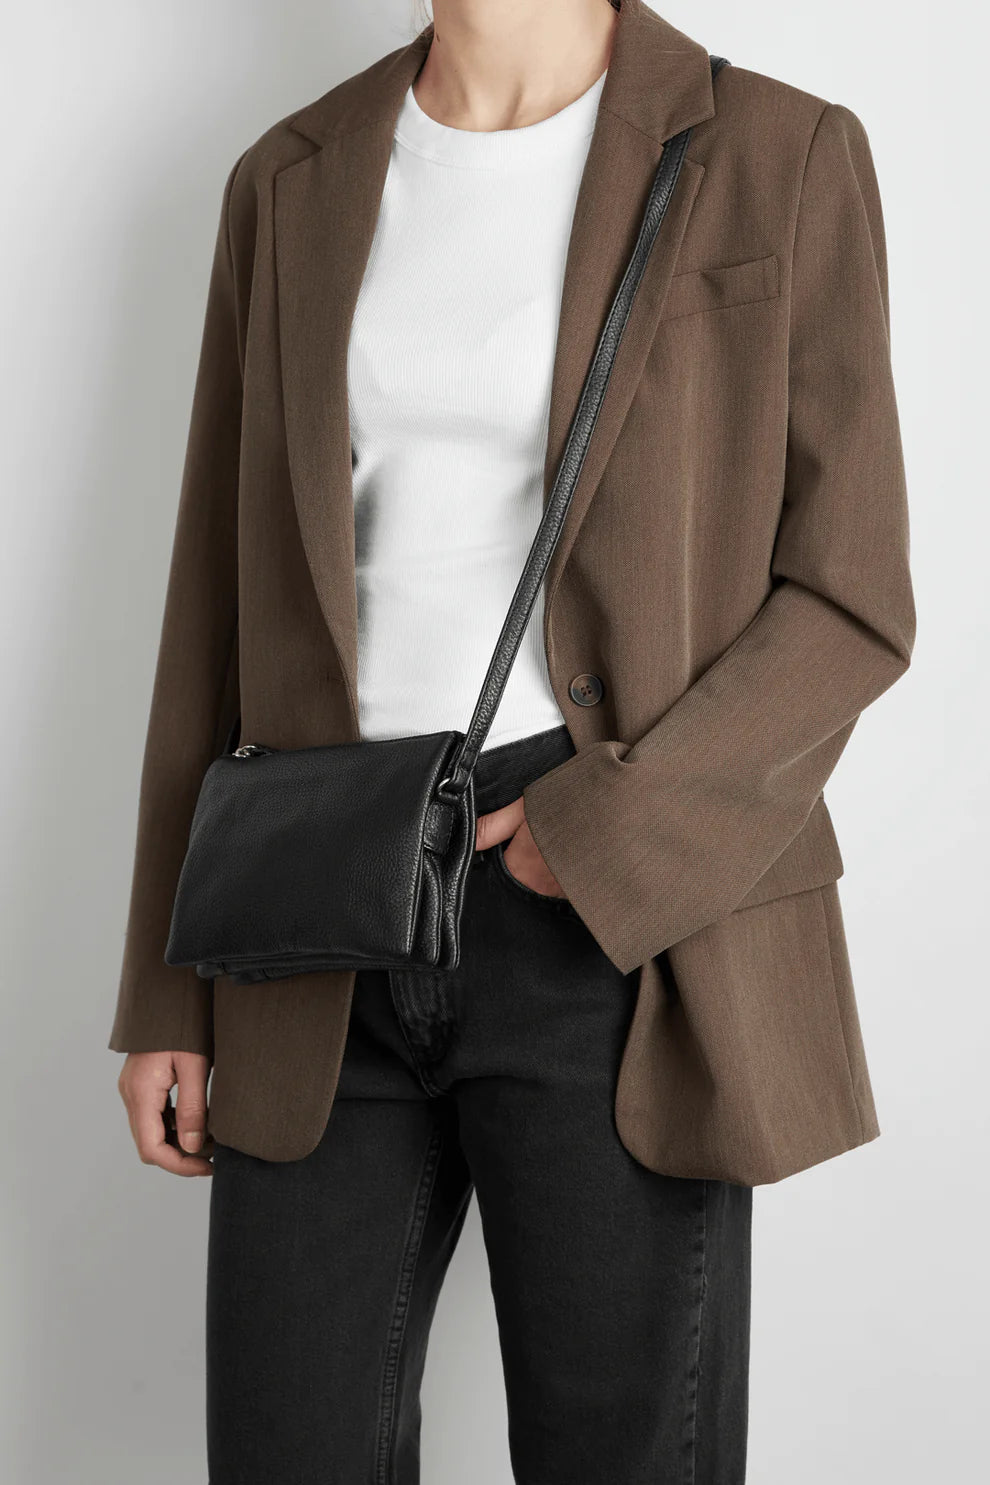 Person wearing a brown blazer and black jeans with a white t-shirt, carrying a Markberg Grain Crossbody Bag.